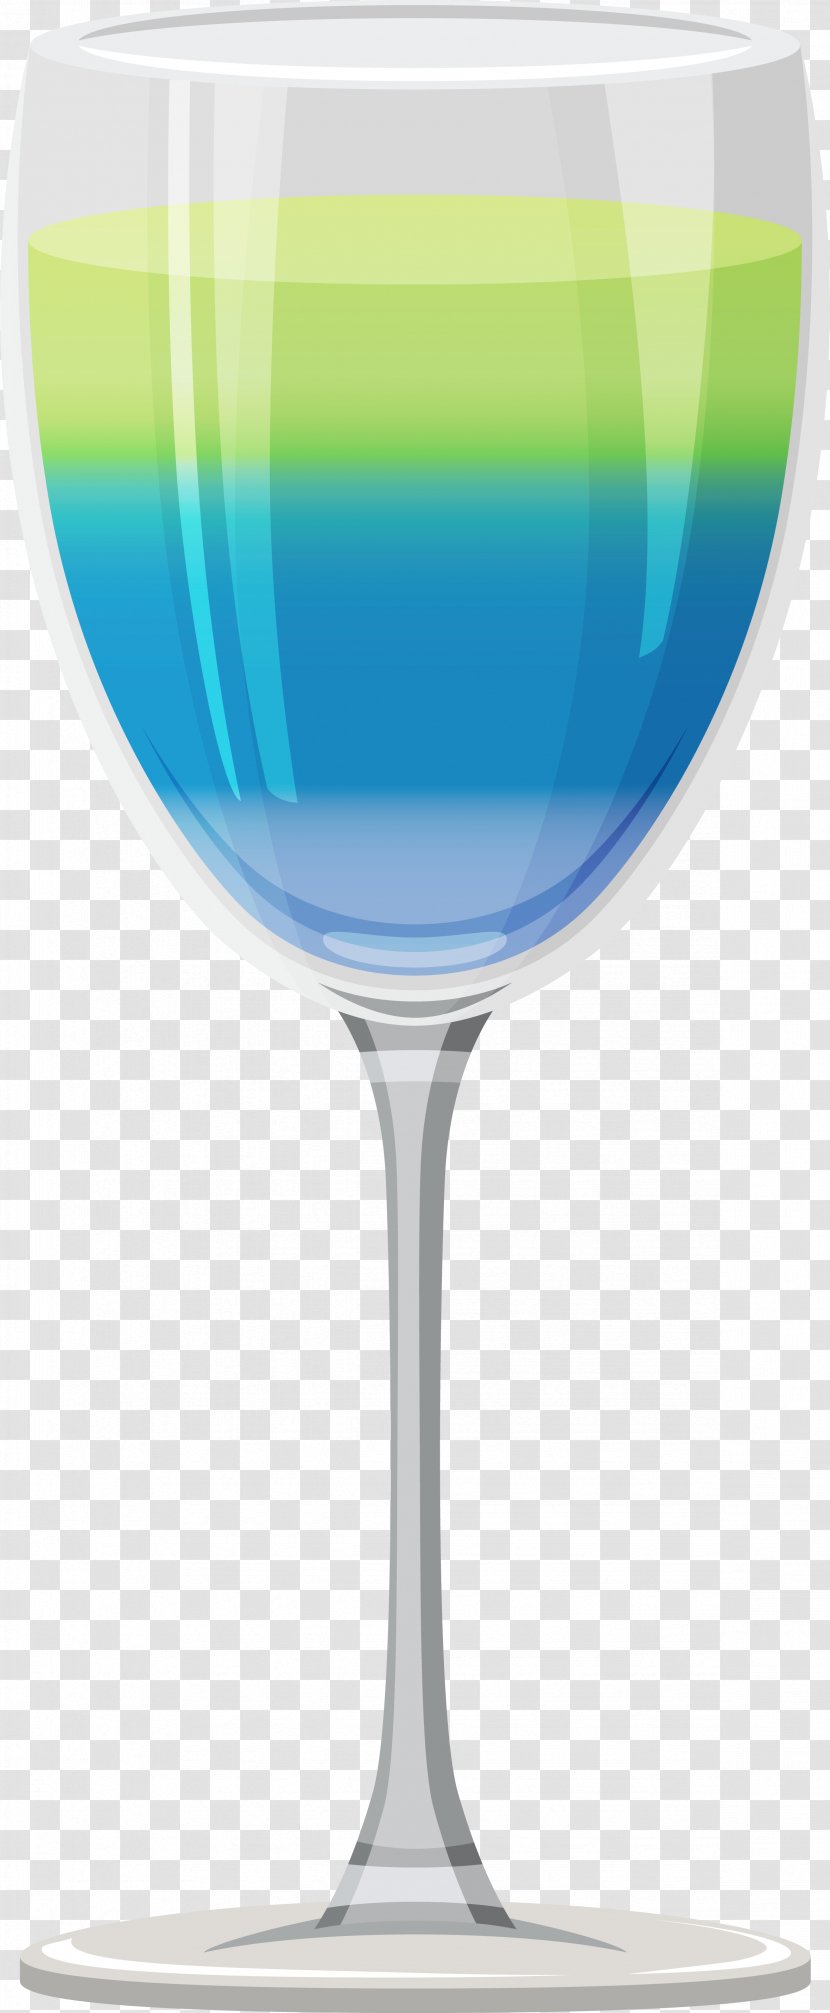 Champagne Cocktail Wine Glass Cup - Stemware - Image Transparent PNG